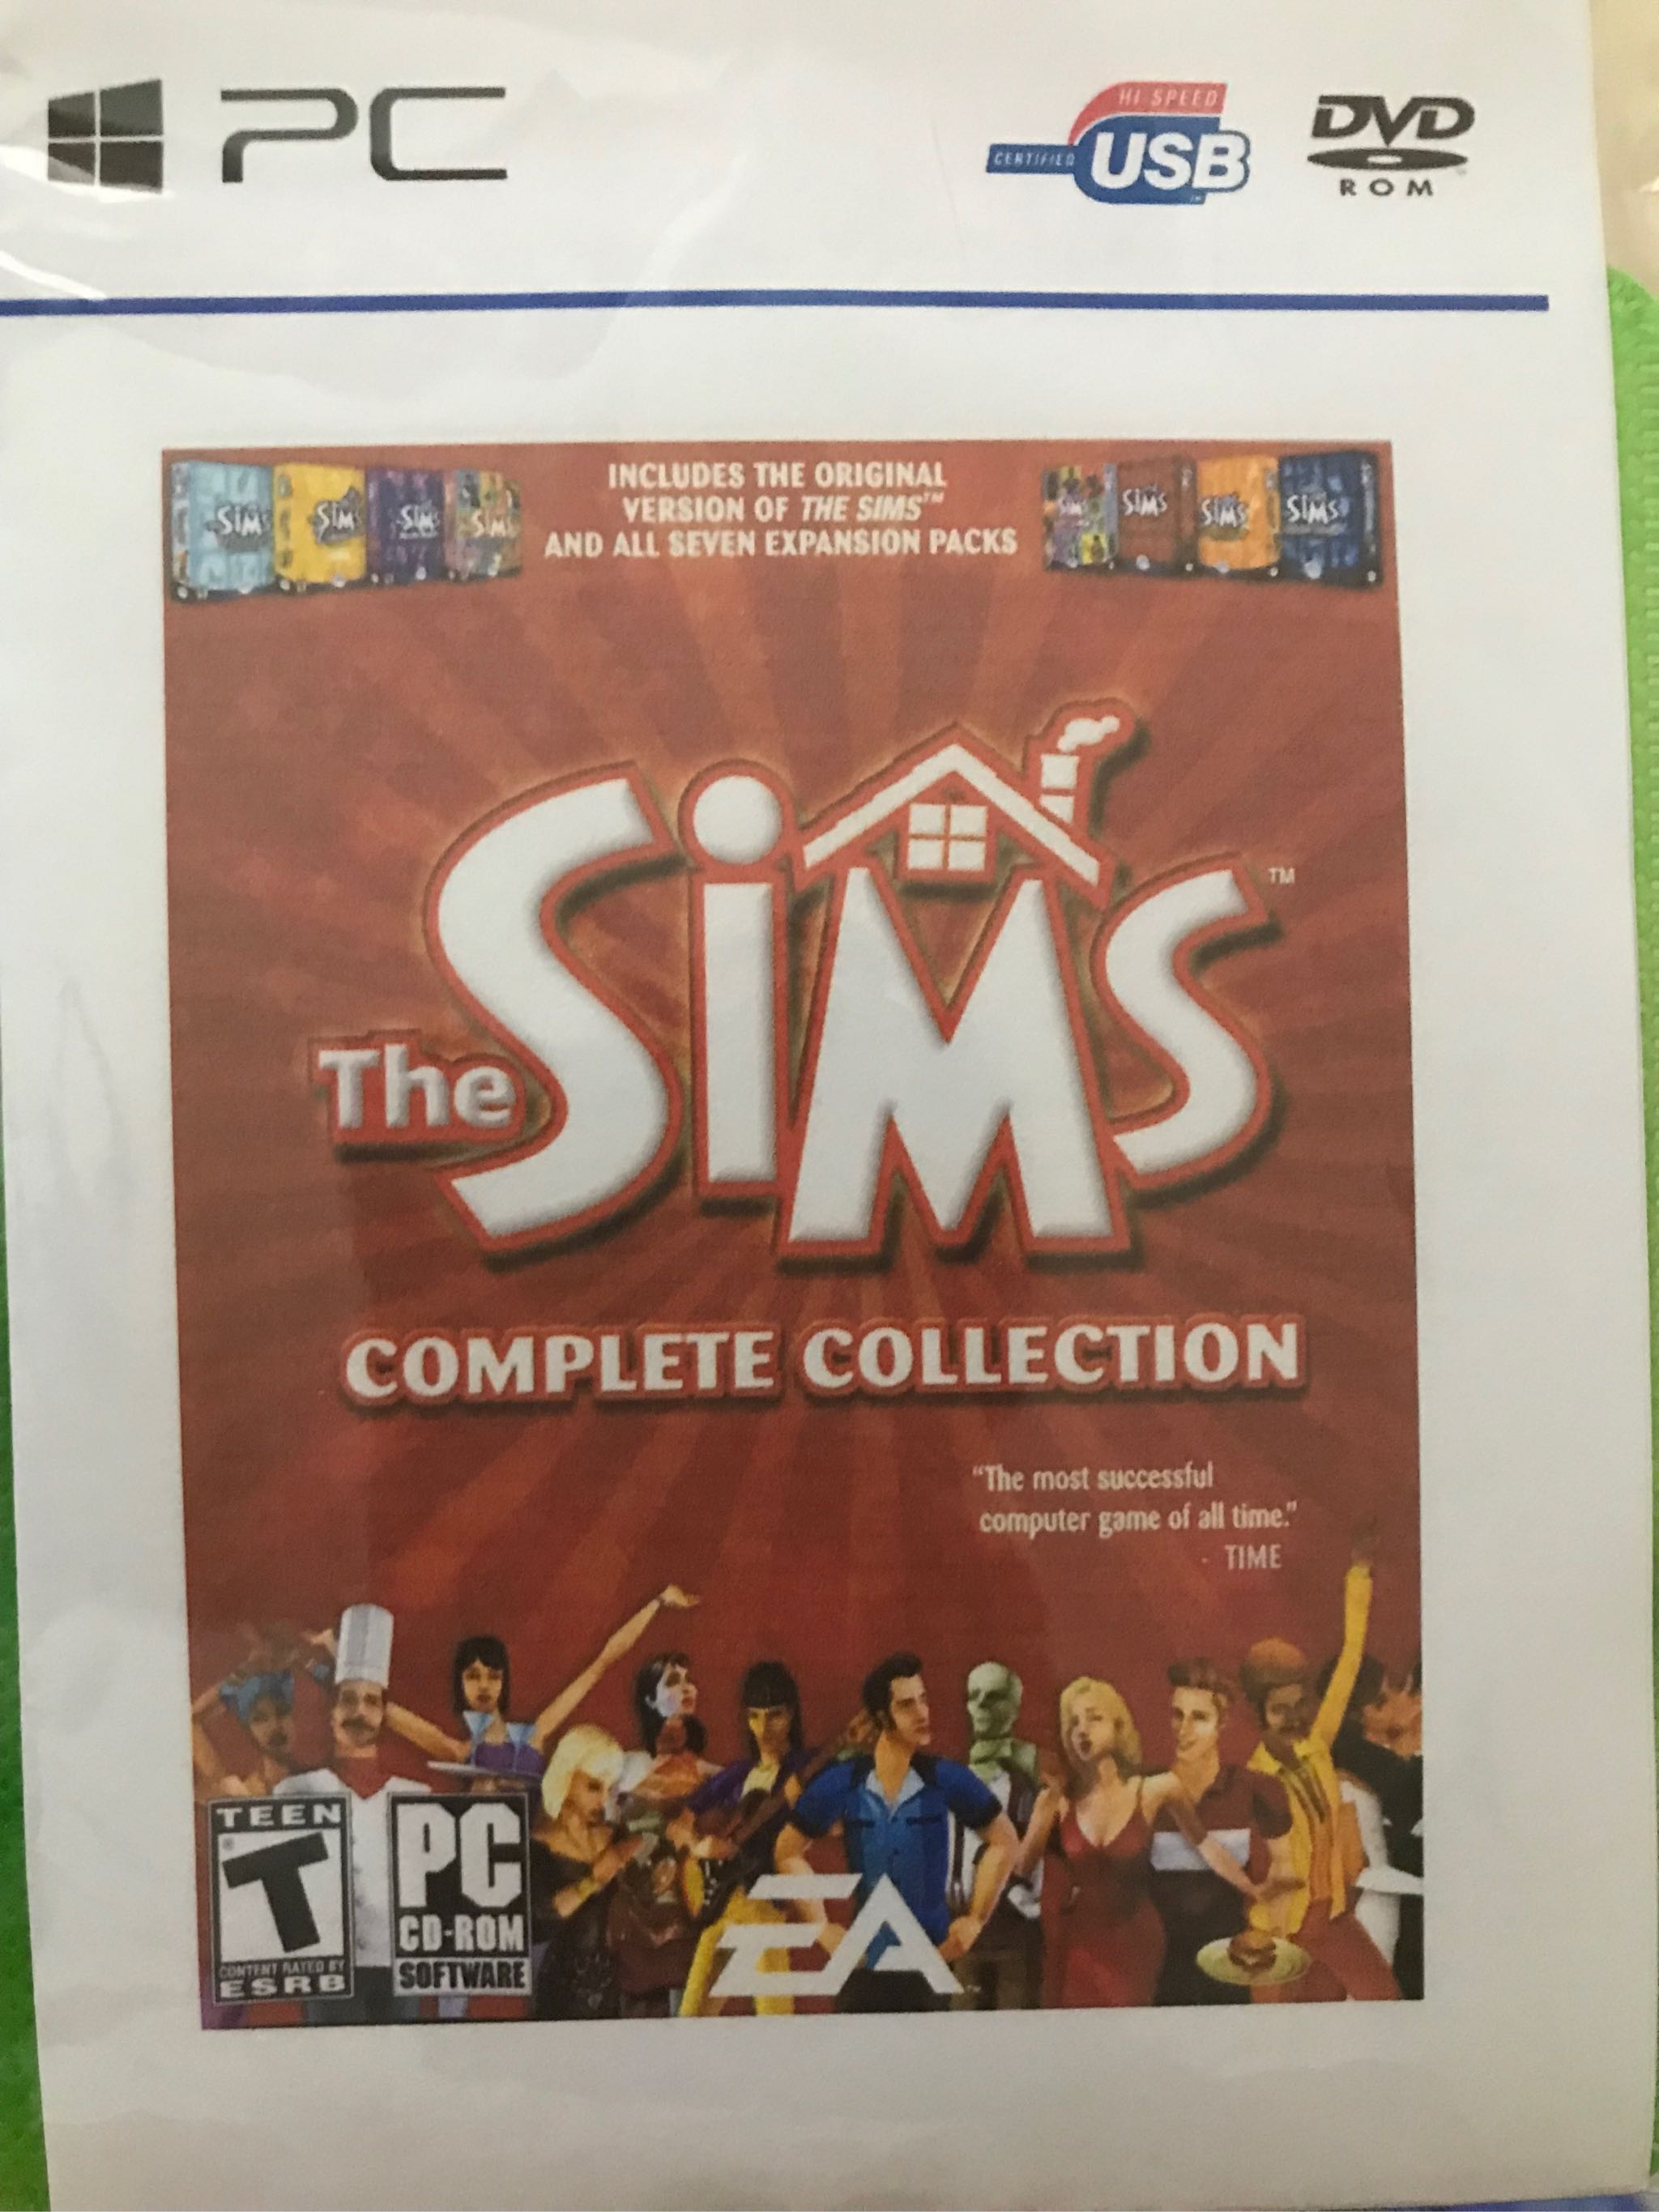 the sims 3 complete collection torrent reddit